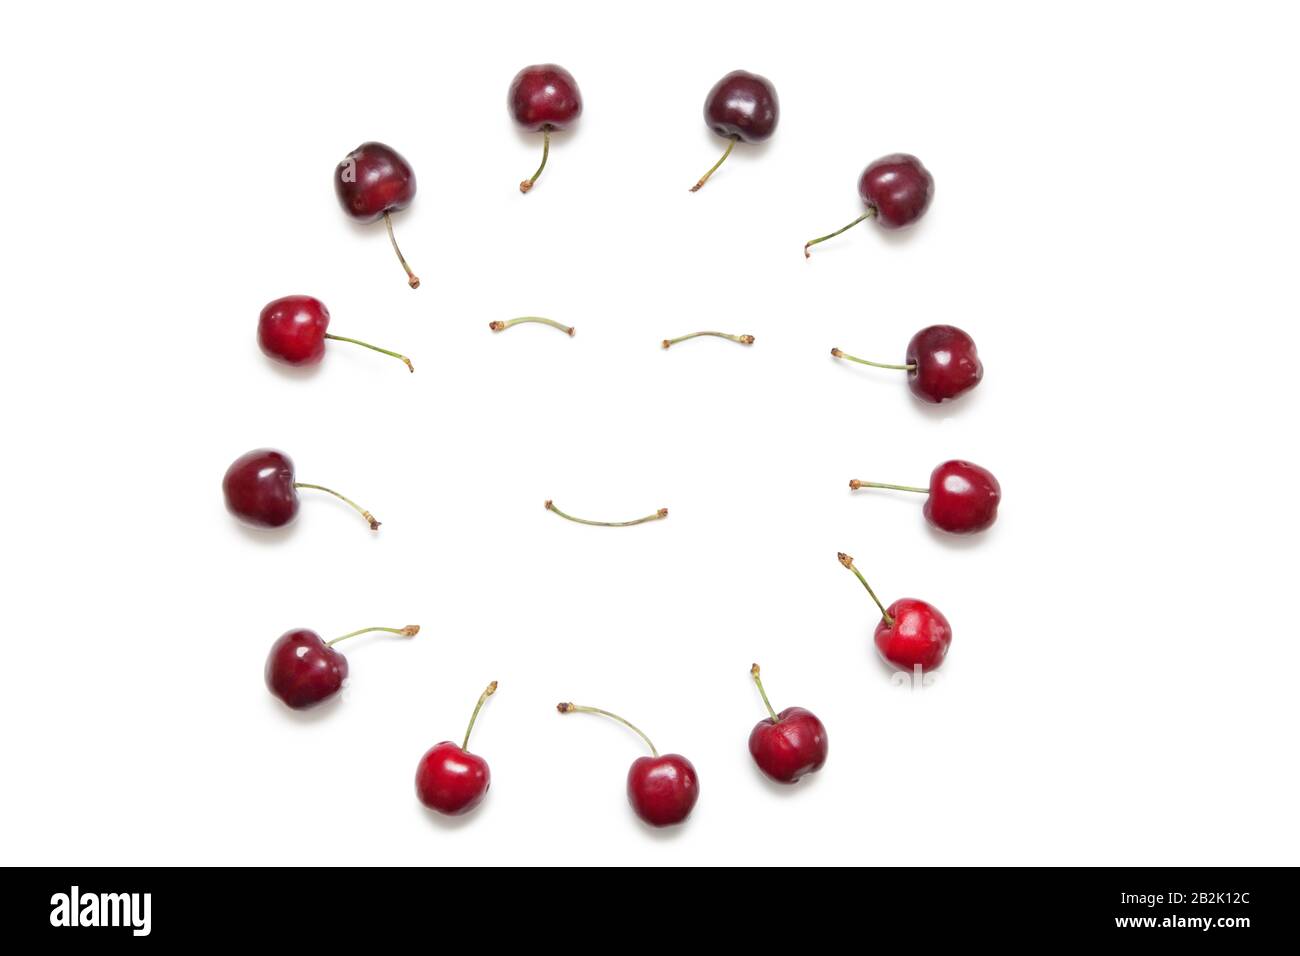 Cherries surrounding smiley face made by stems on white background Stock Photo